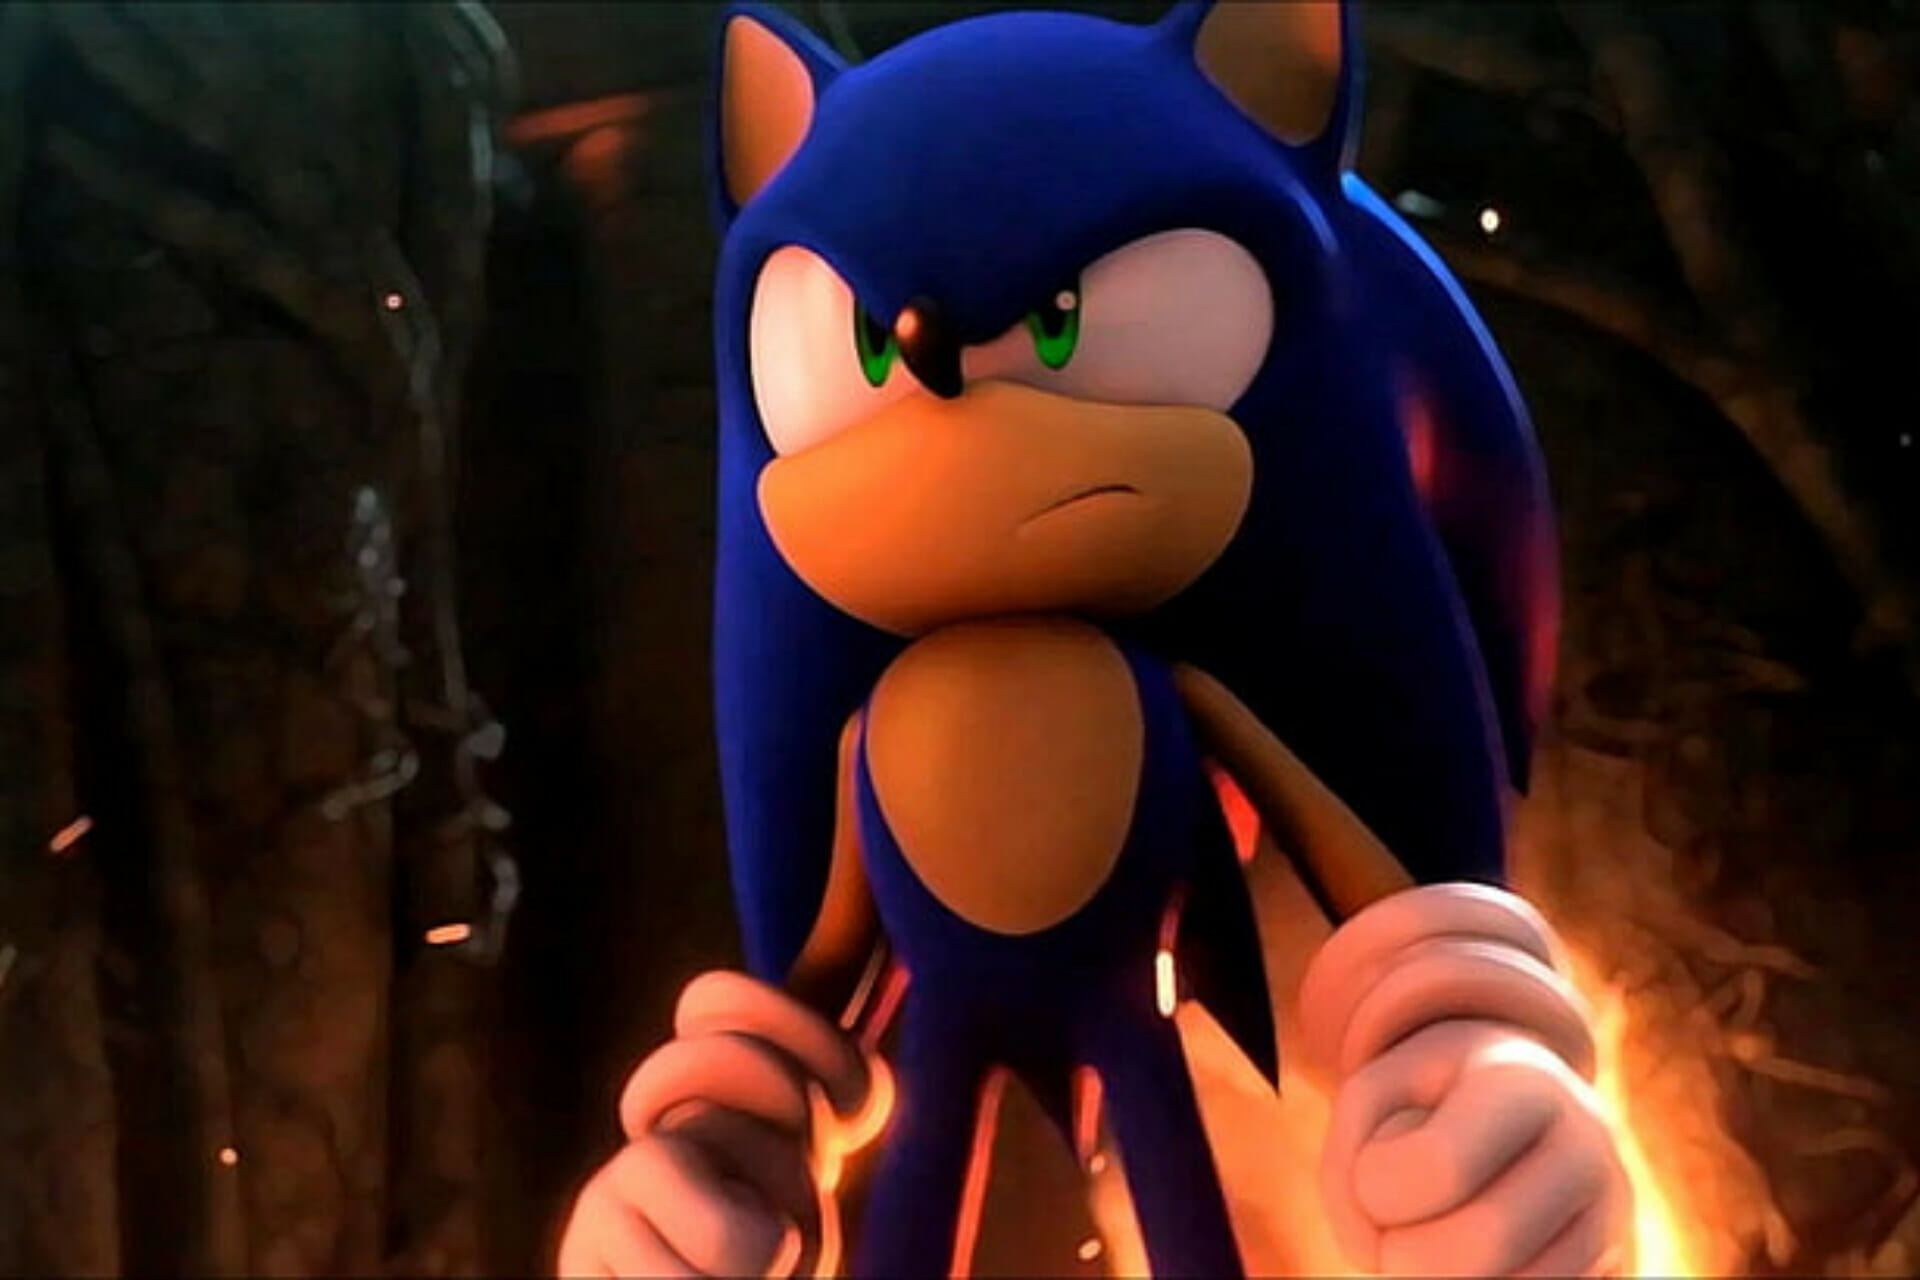 Sonic The Hedgehog has been relisted on Xbox 360 Marketplace ($5